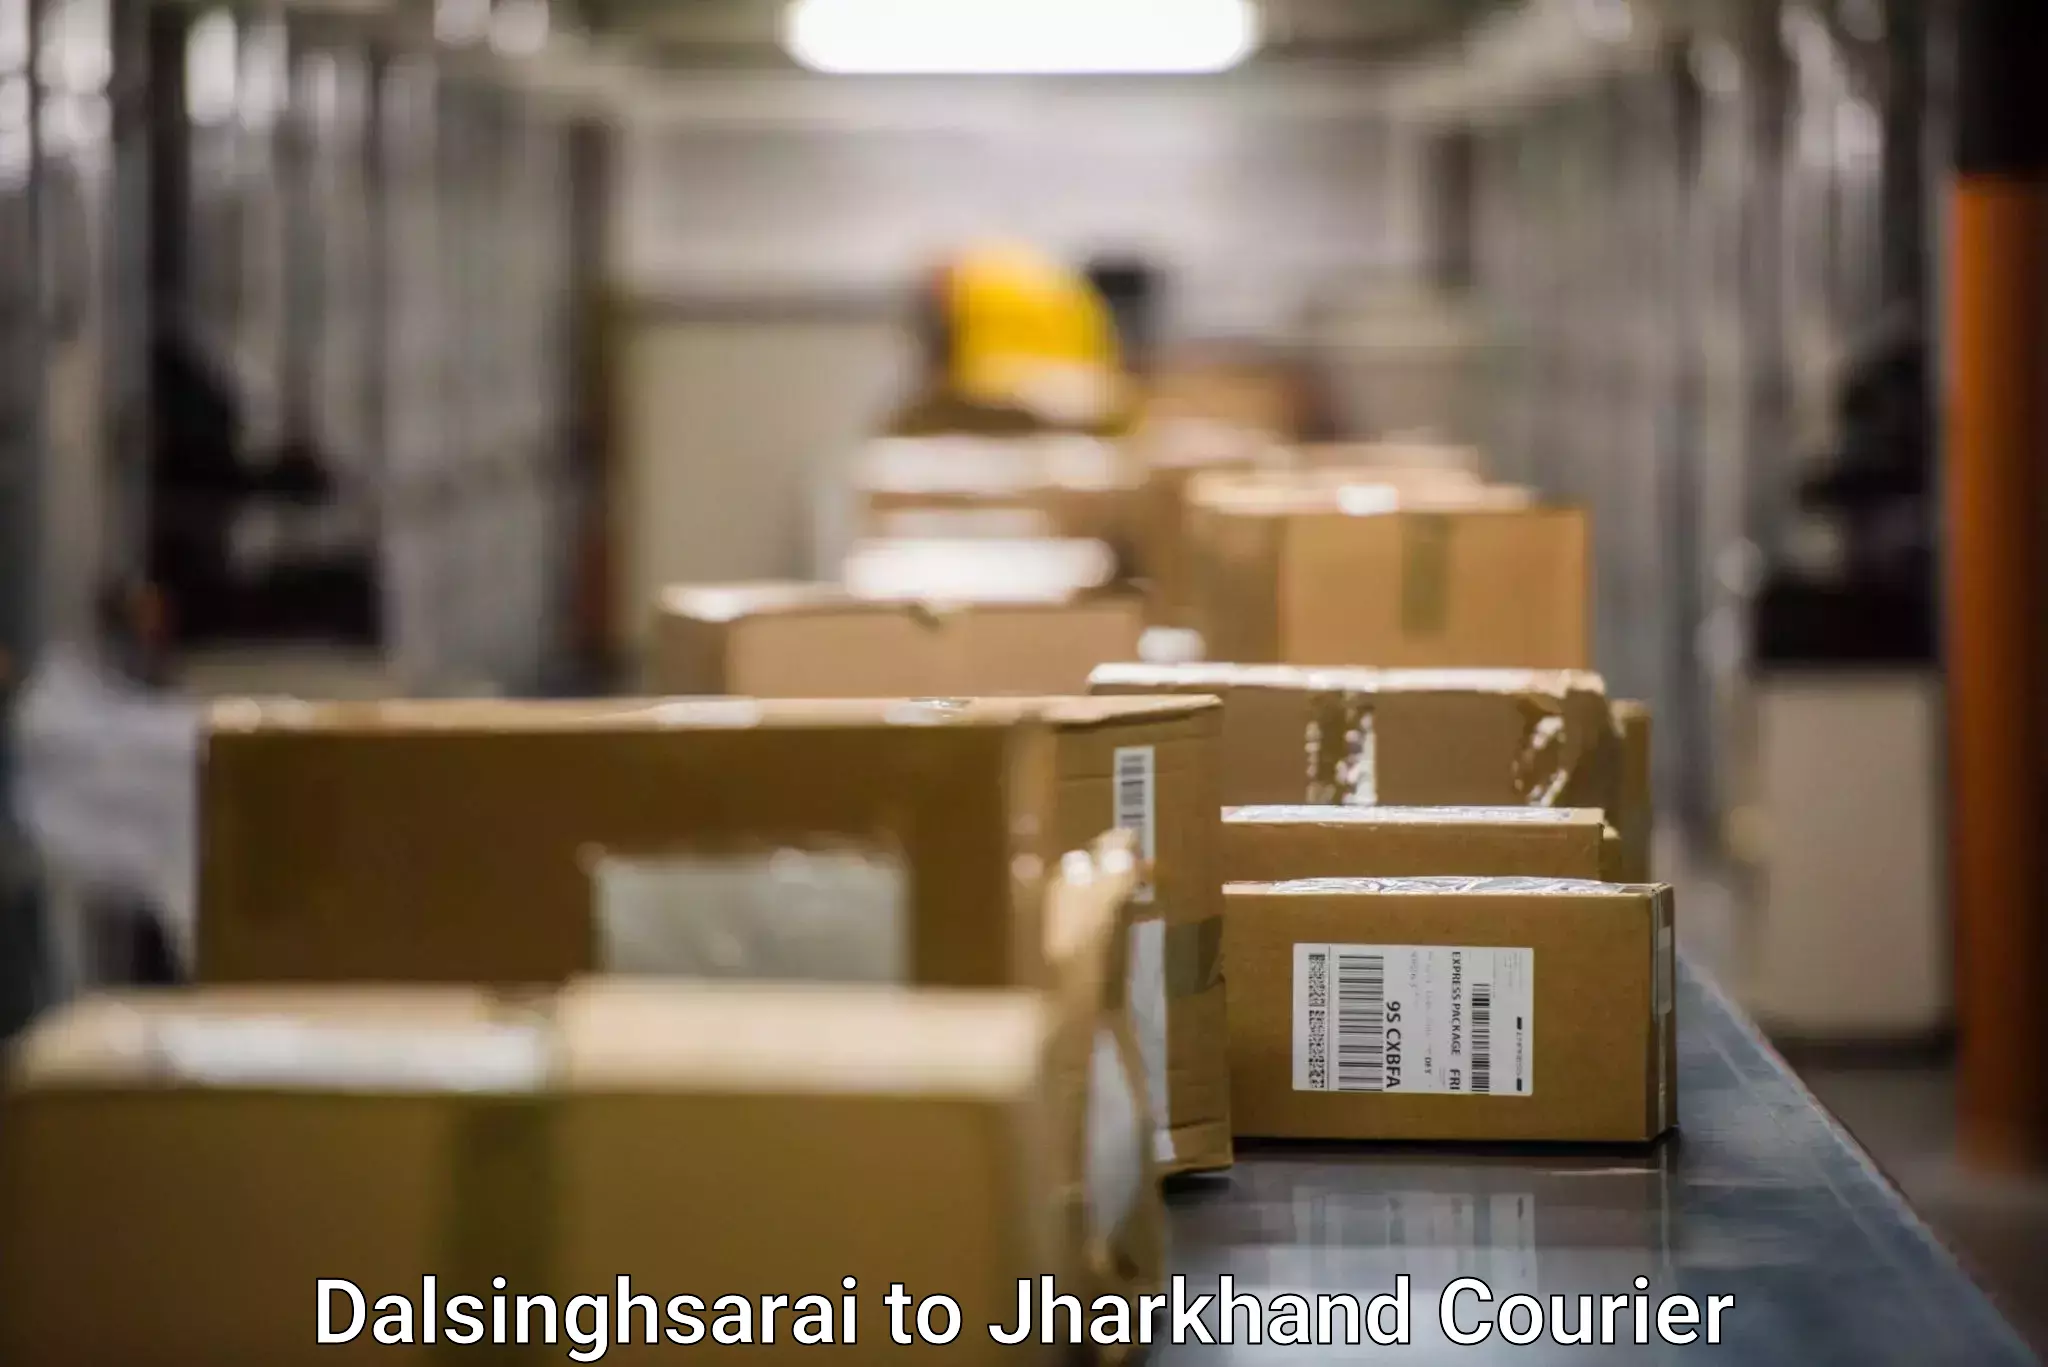 Holiday shipping services Dalsinghsarai to Nirsa